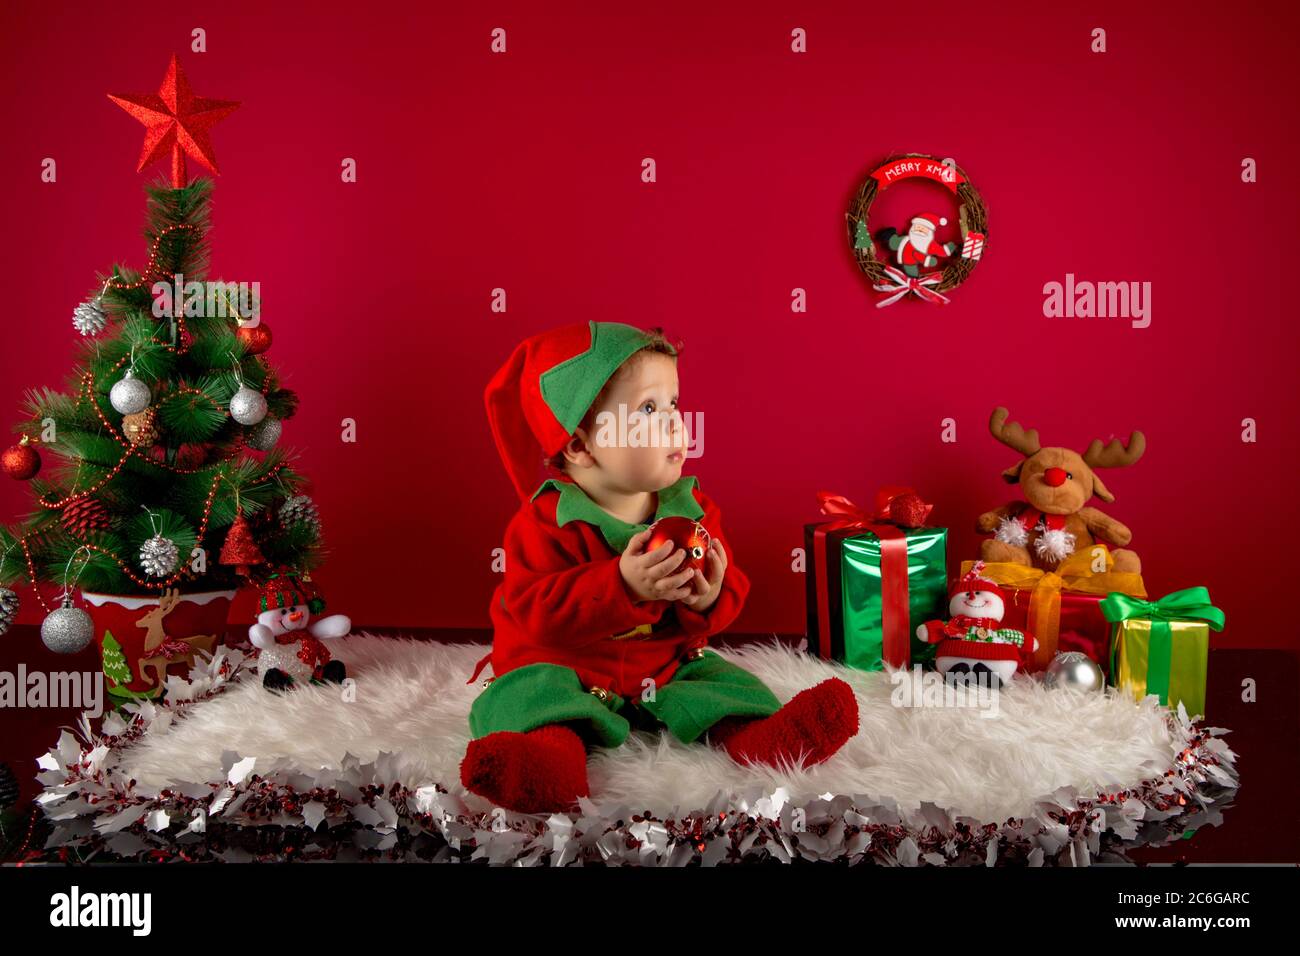 Baby dressed as an elf on her first Christmas, set in a setting with a Christmas tree, gifts, snow, reindeer and decorations Stock Photo